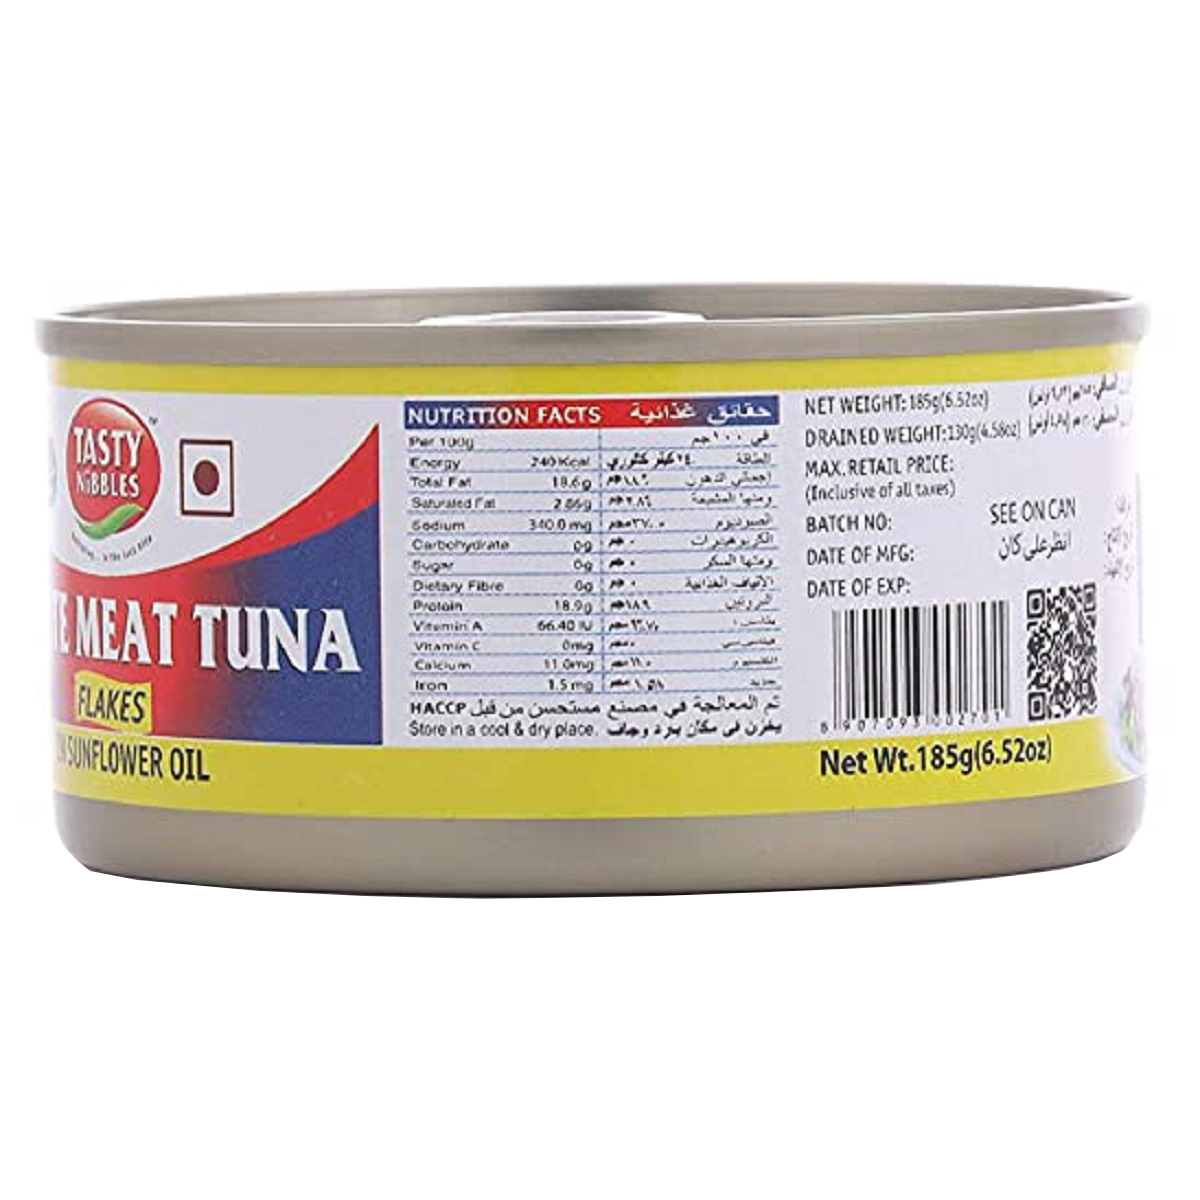 Tasty Nibbles White Meat Tuna Flakes In Sunflower Oil 185g